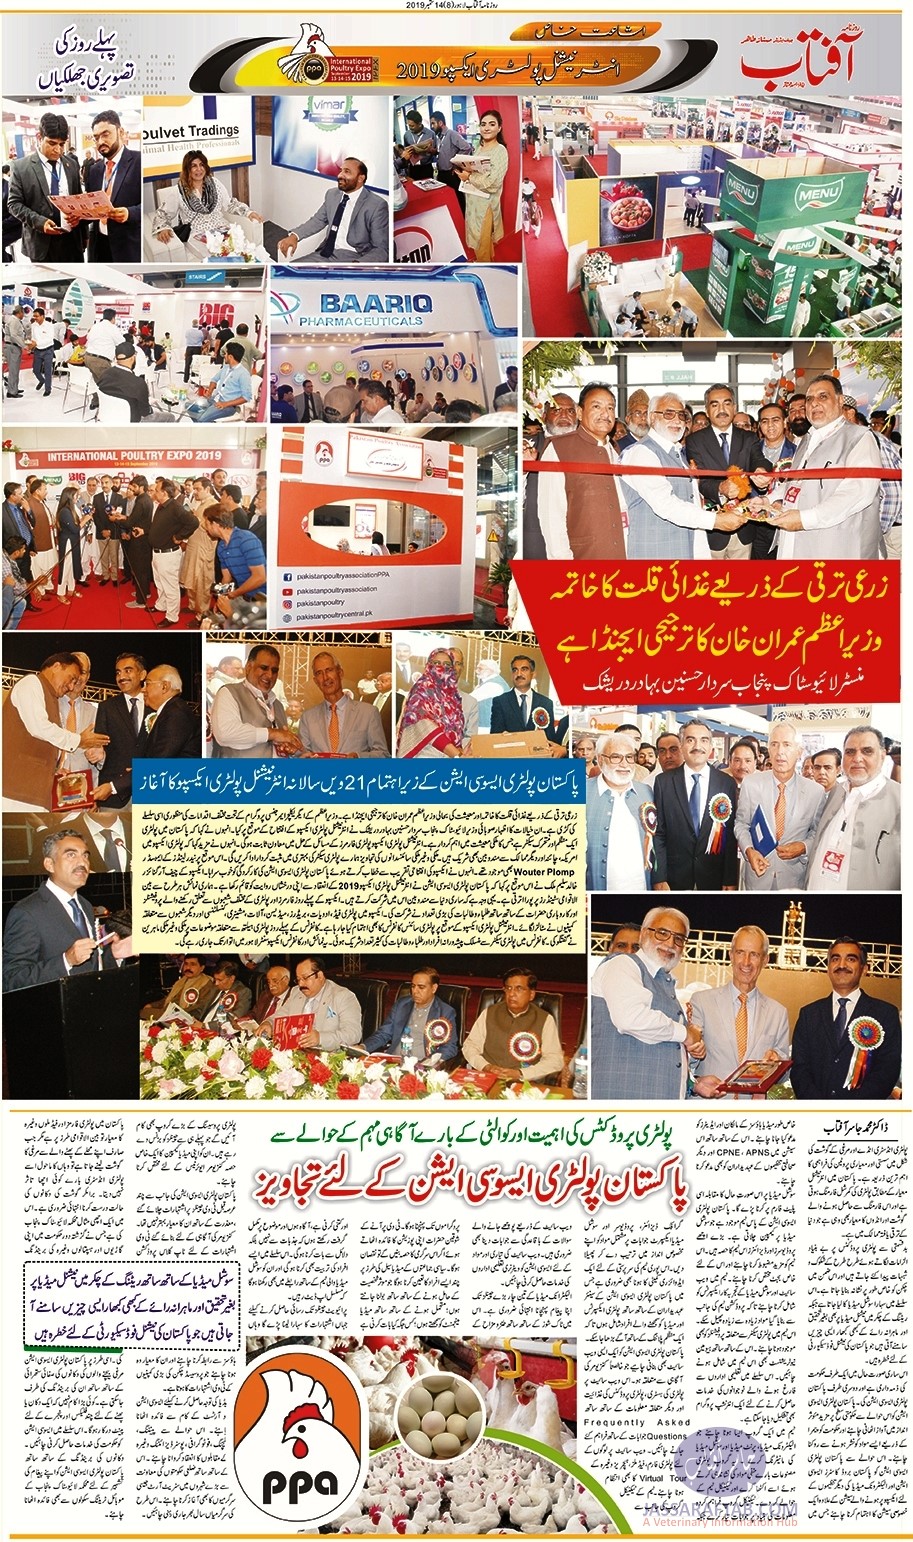 Daily Aftab First Day News of International Poultry Expo 2019 